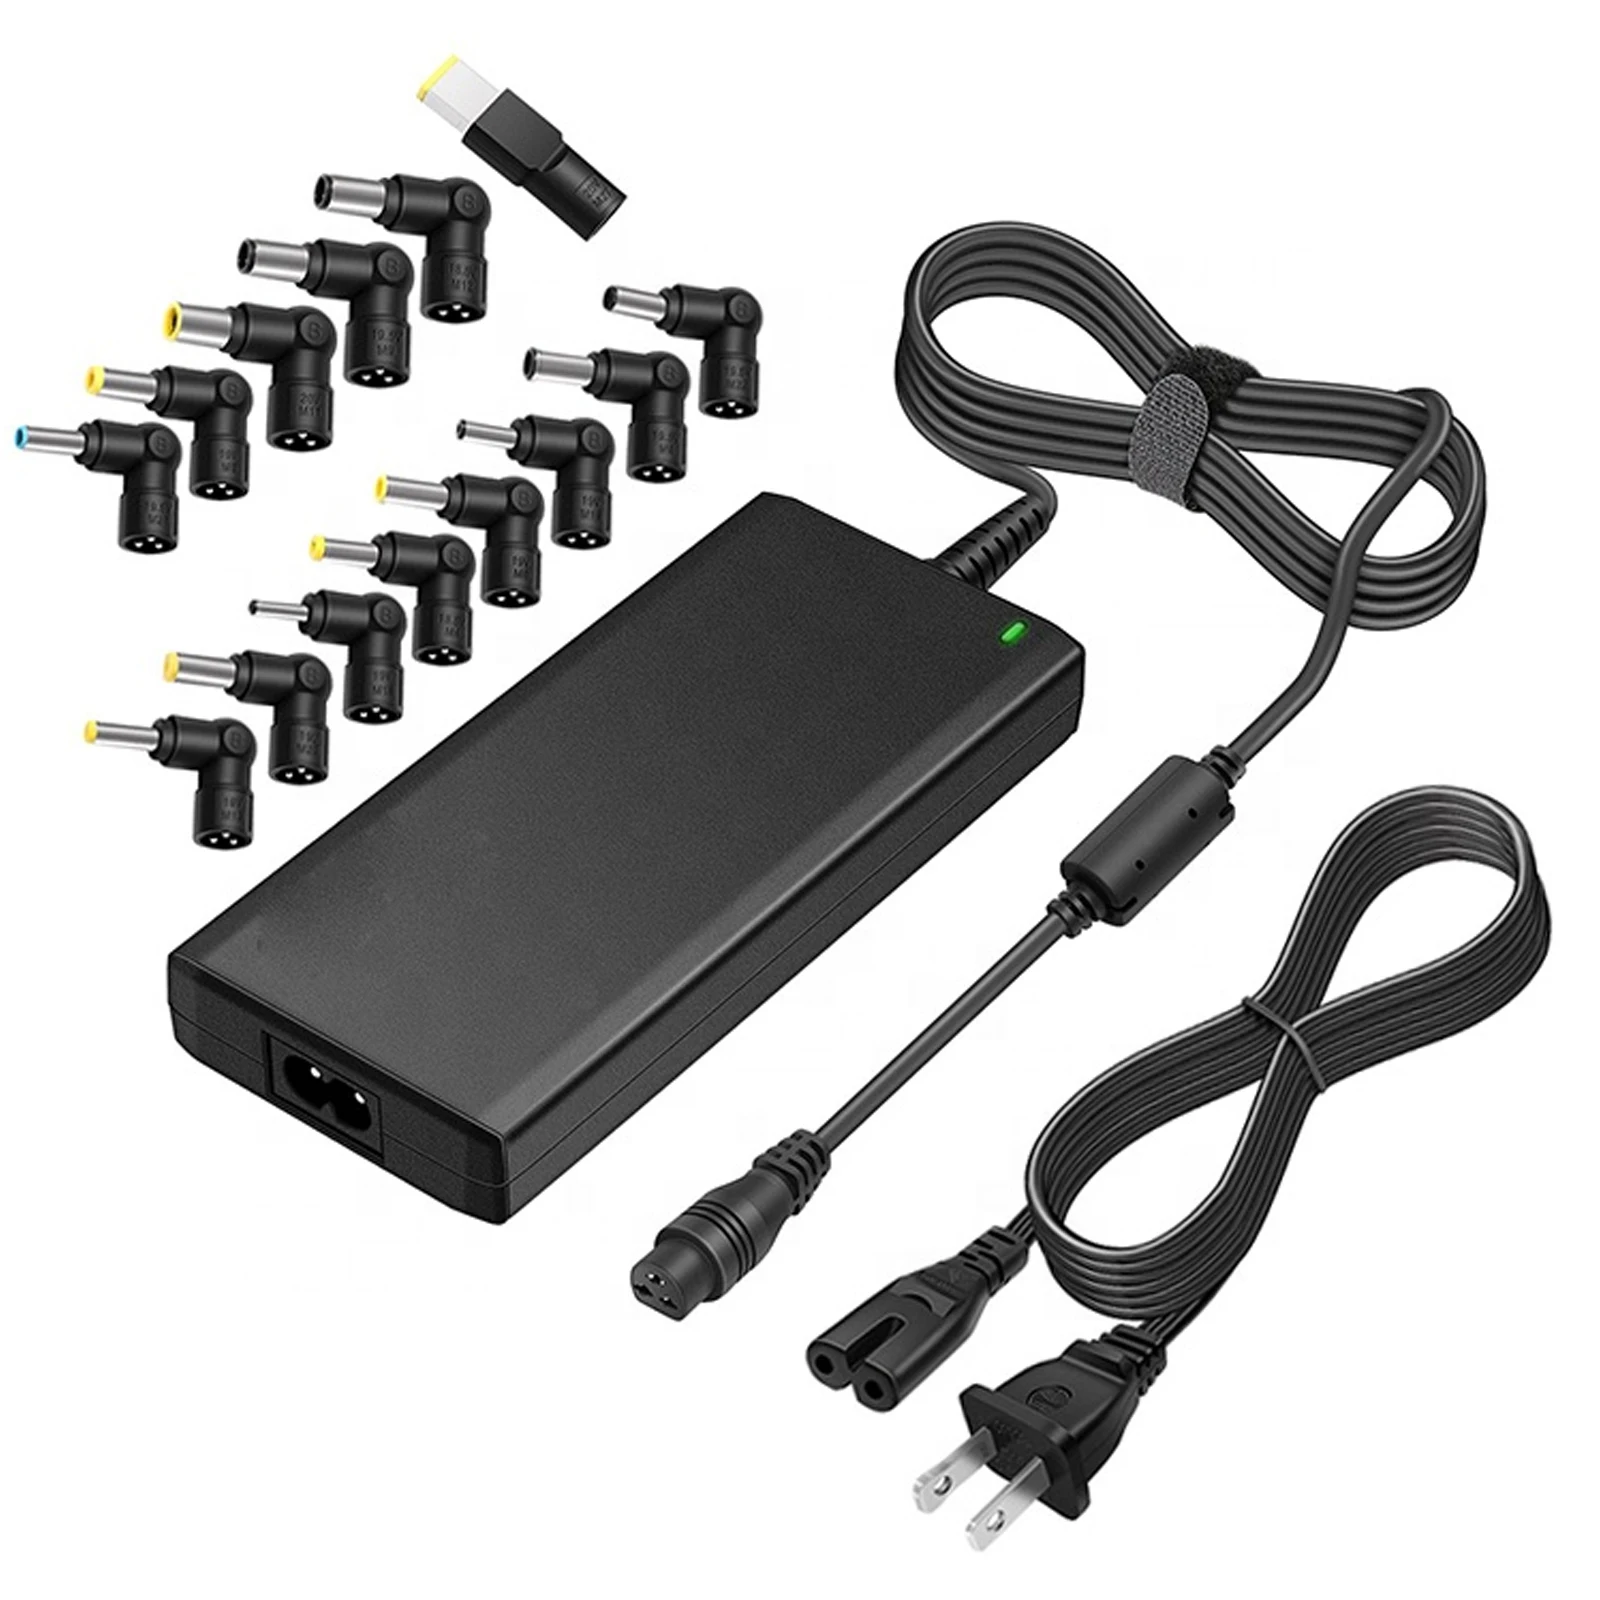 Best Sellers 65w Ac Power Adapter Universal Charger For Laptop Hp Dell Acer  Asus Lenovo  19v  20v With 8-12 Tips - Buy Universal Charger For  Laptop,Laptop Adapter,Power Adapter Universal Product